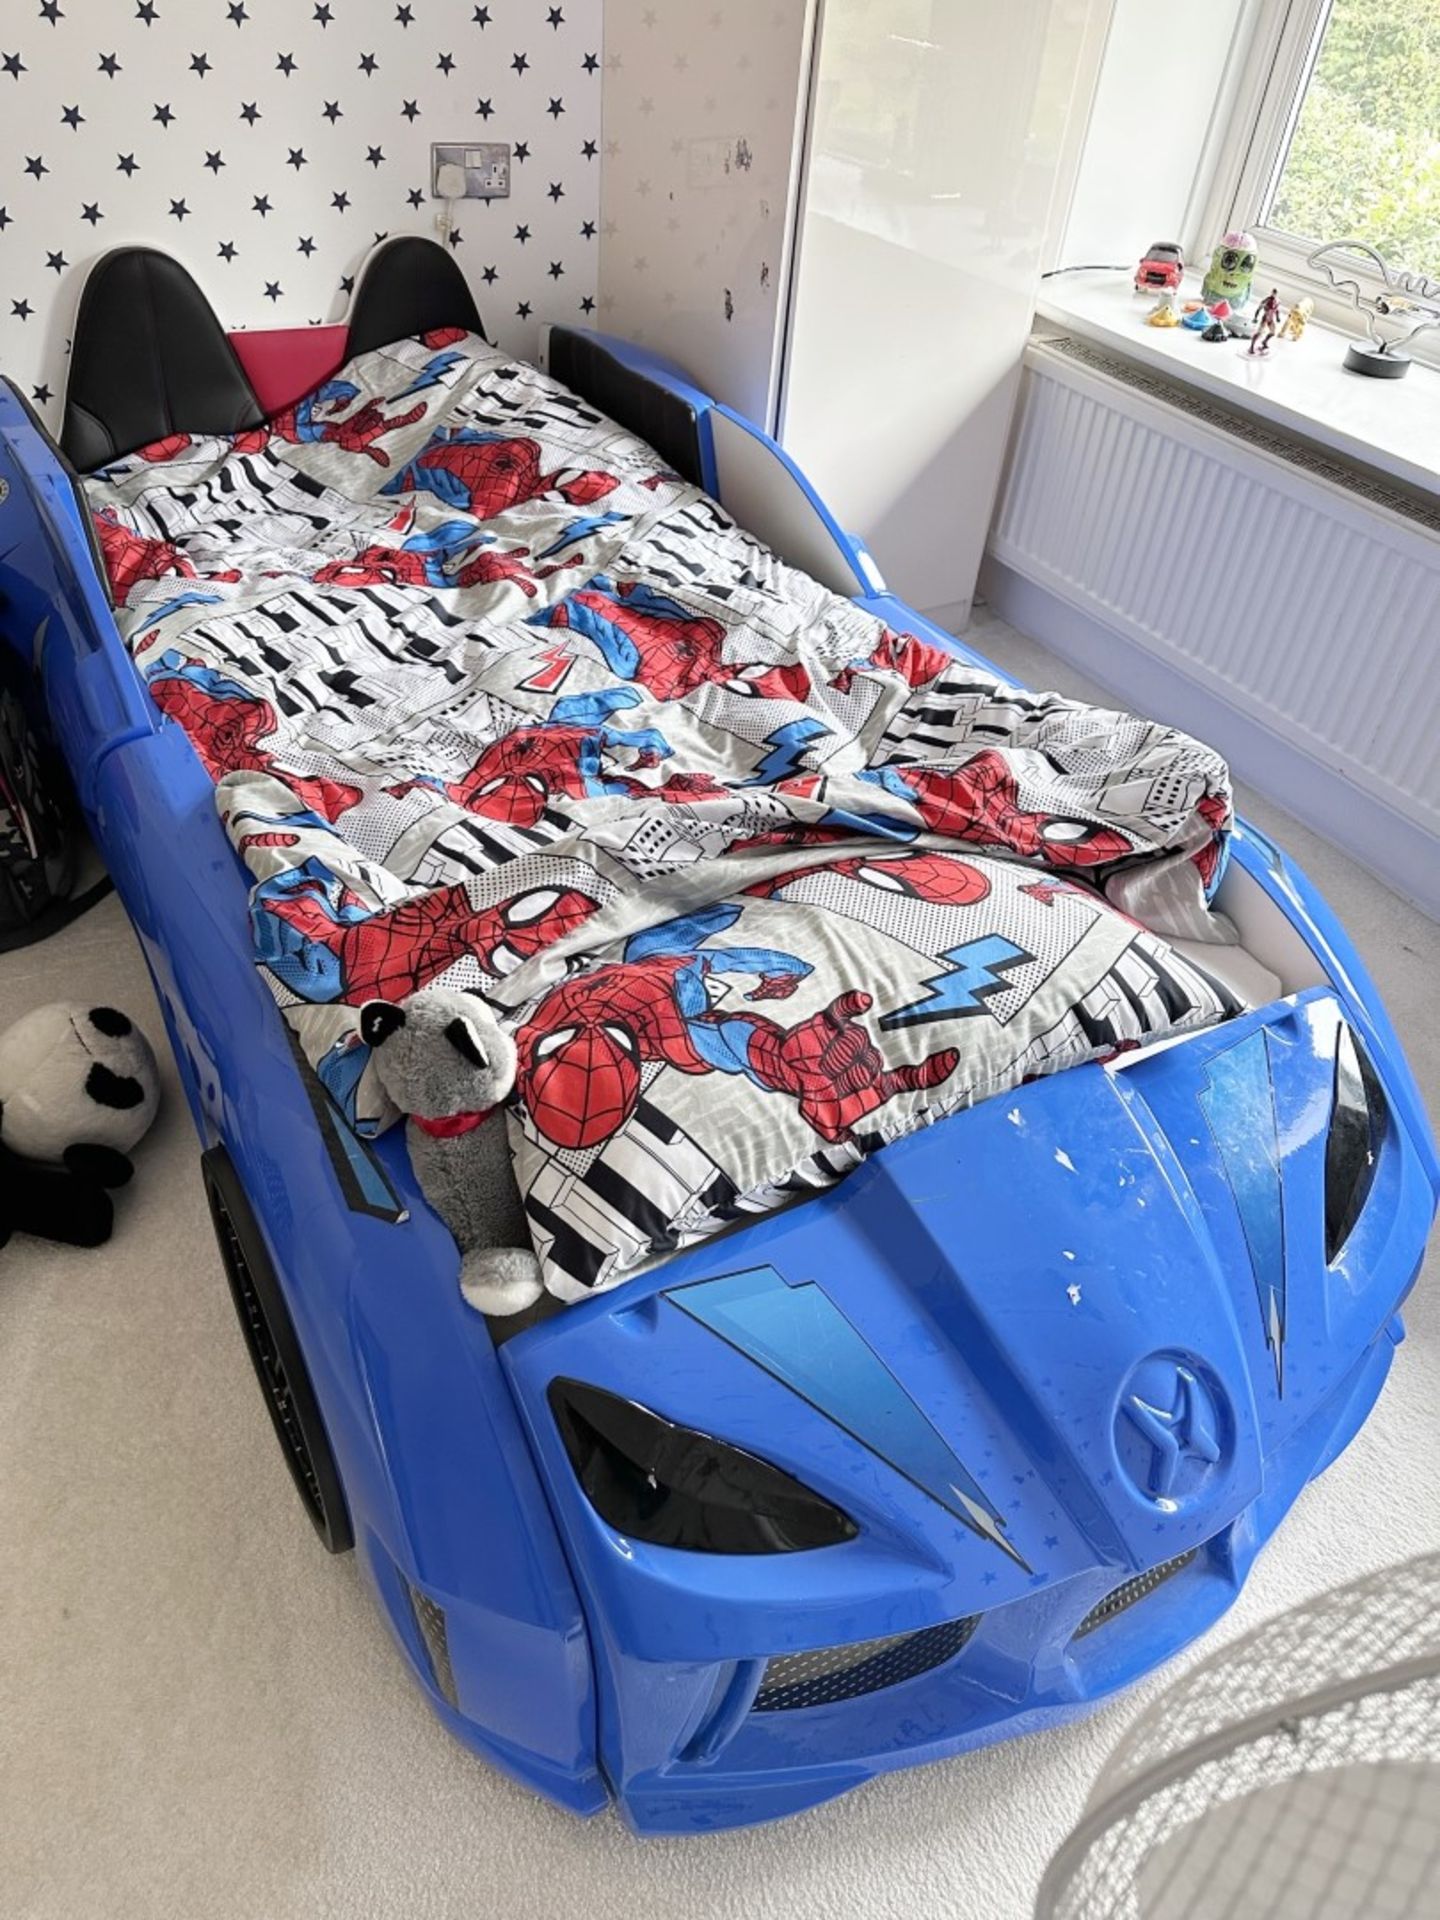 1 x Children's MVN3 Car Bed With Remote Controls For Lights And Sound - RRP.£549.99